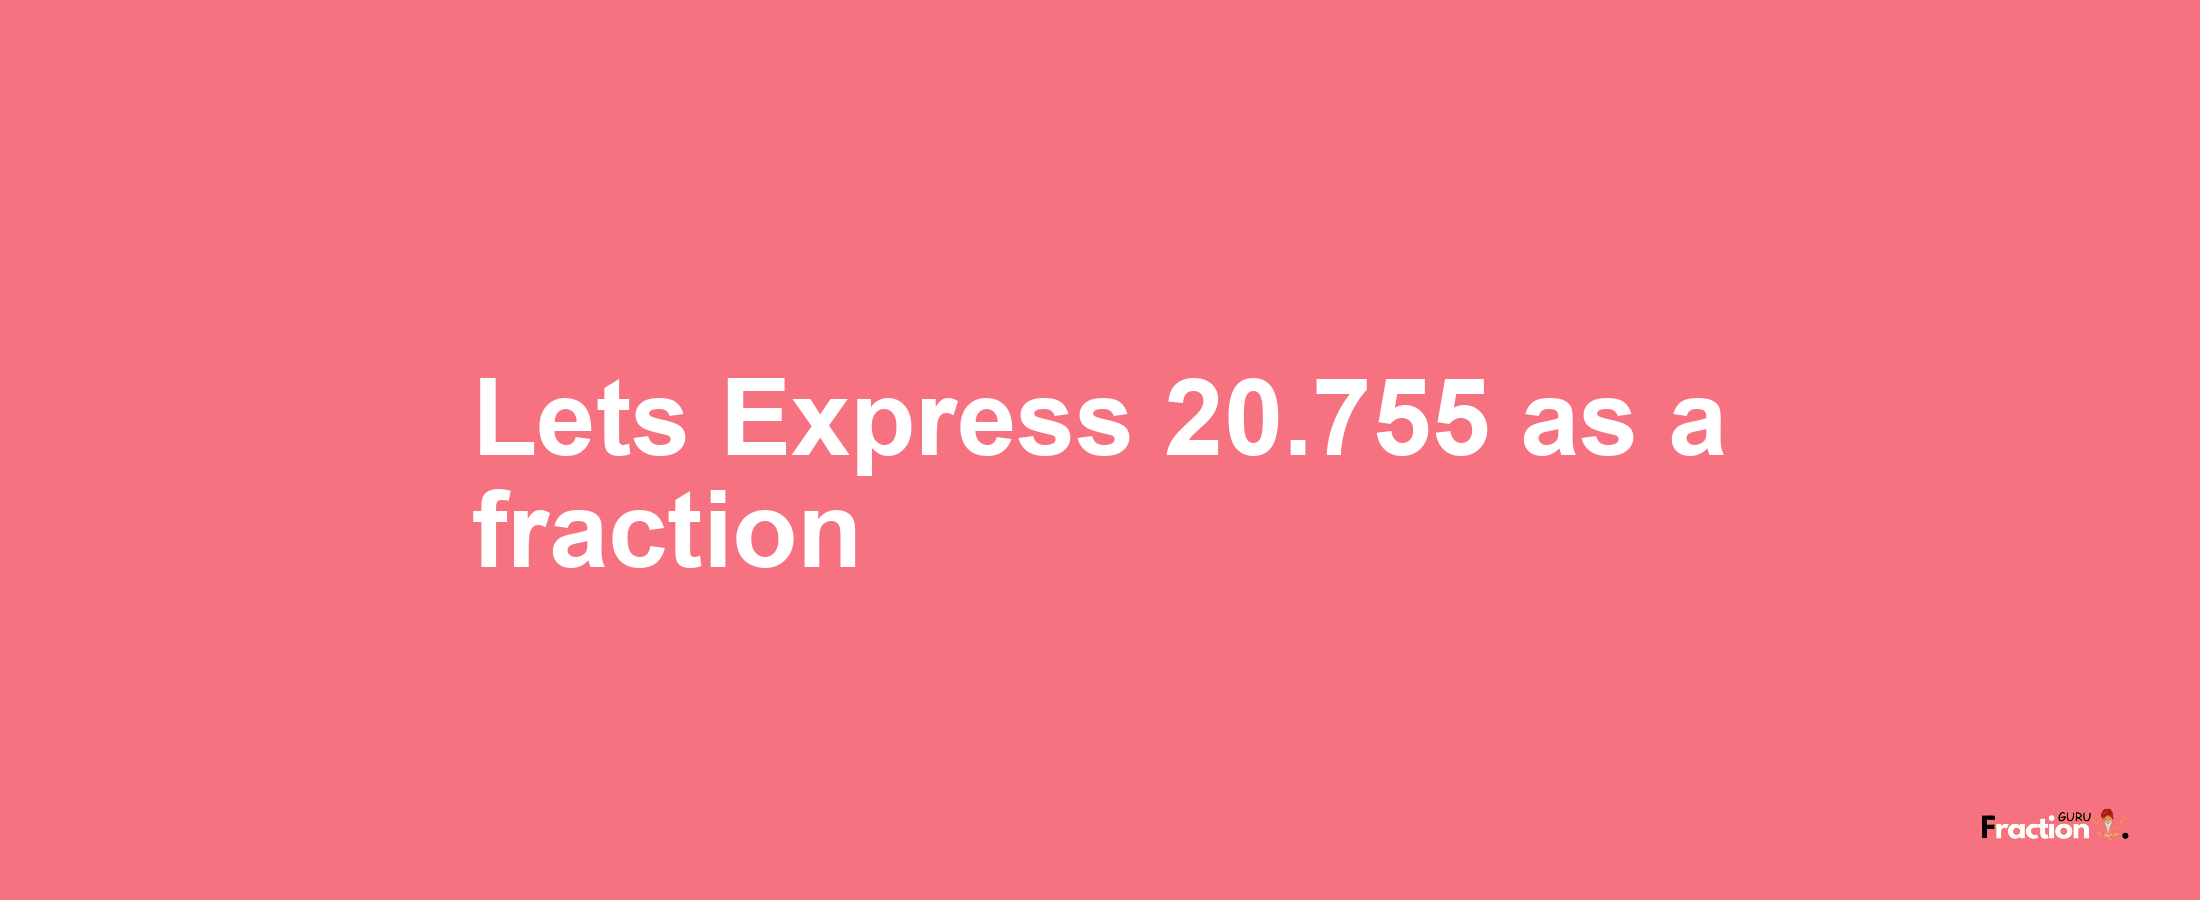 Lets Express 20.755 as afraction